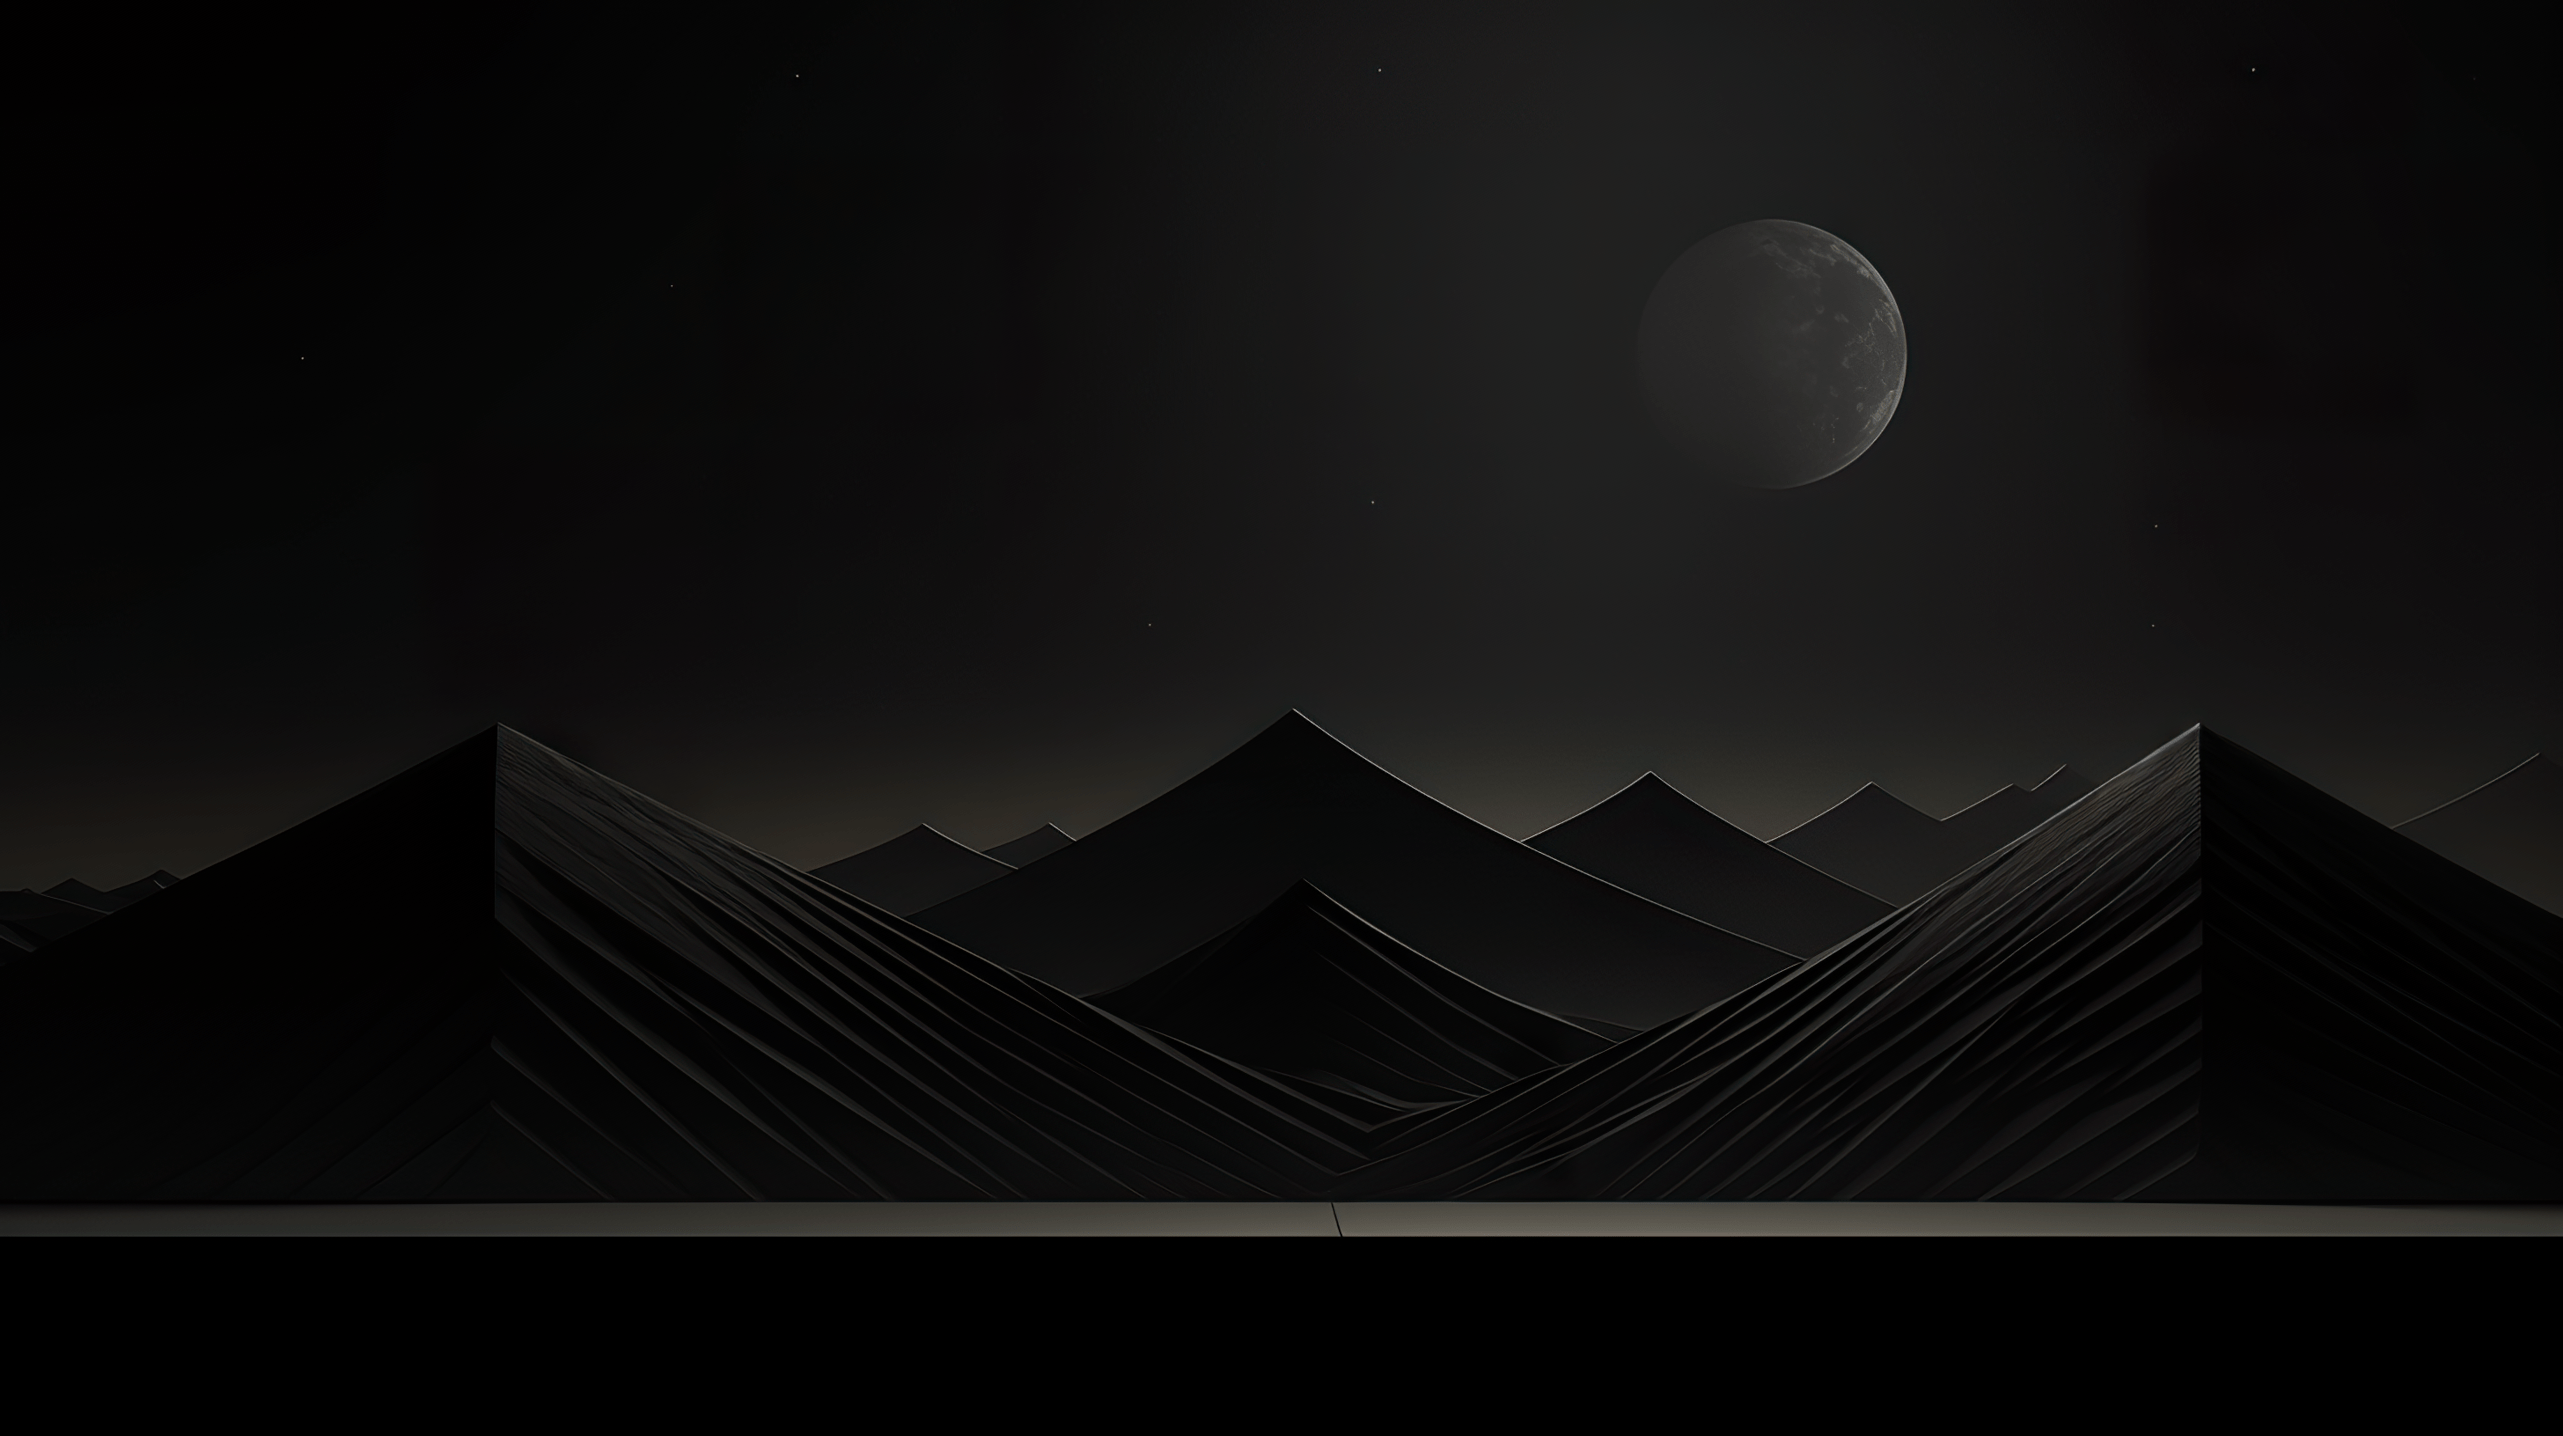 The image is a wallpaper with a dark background and a half-moon on the right. - Black